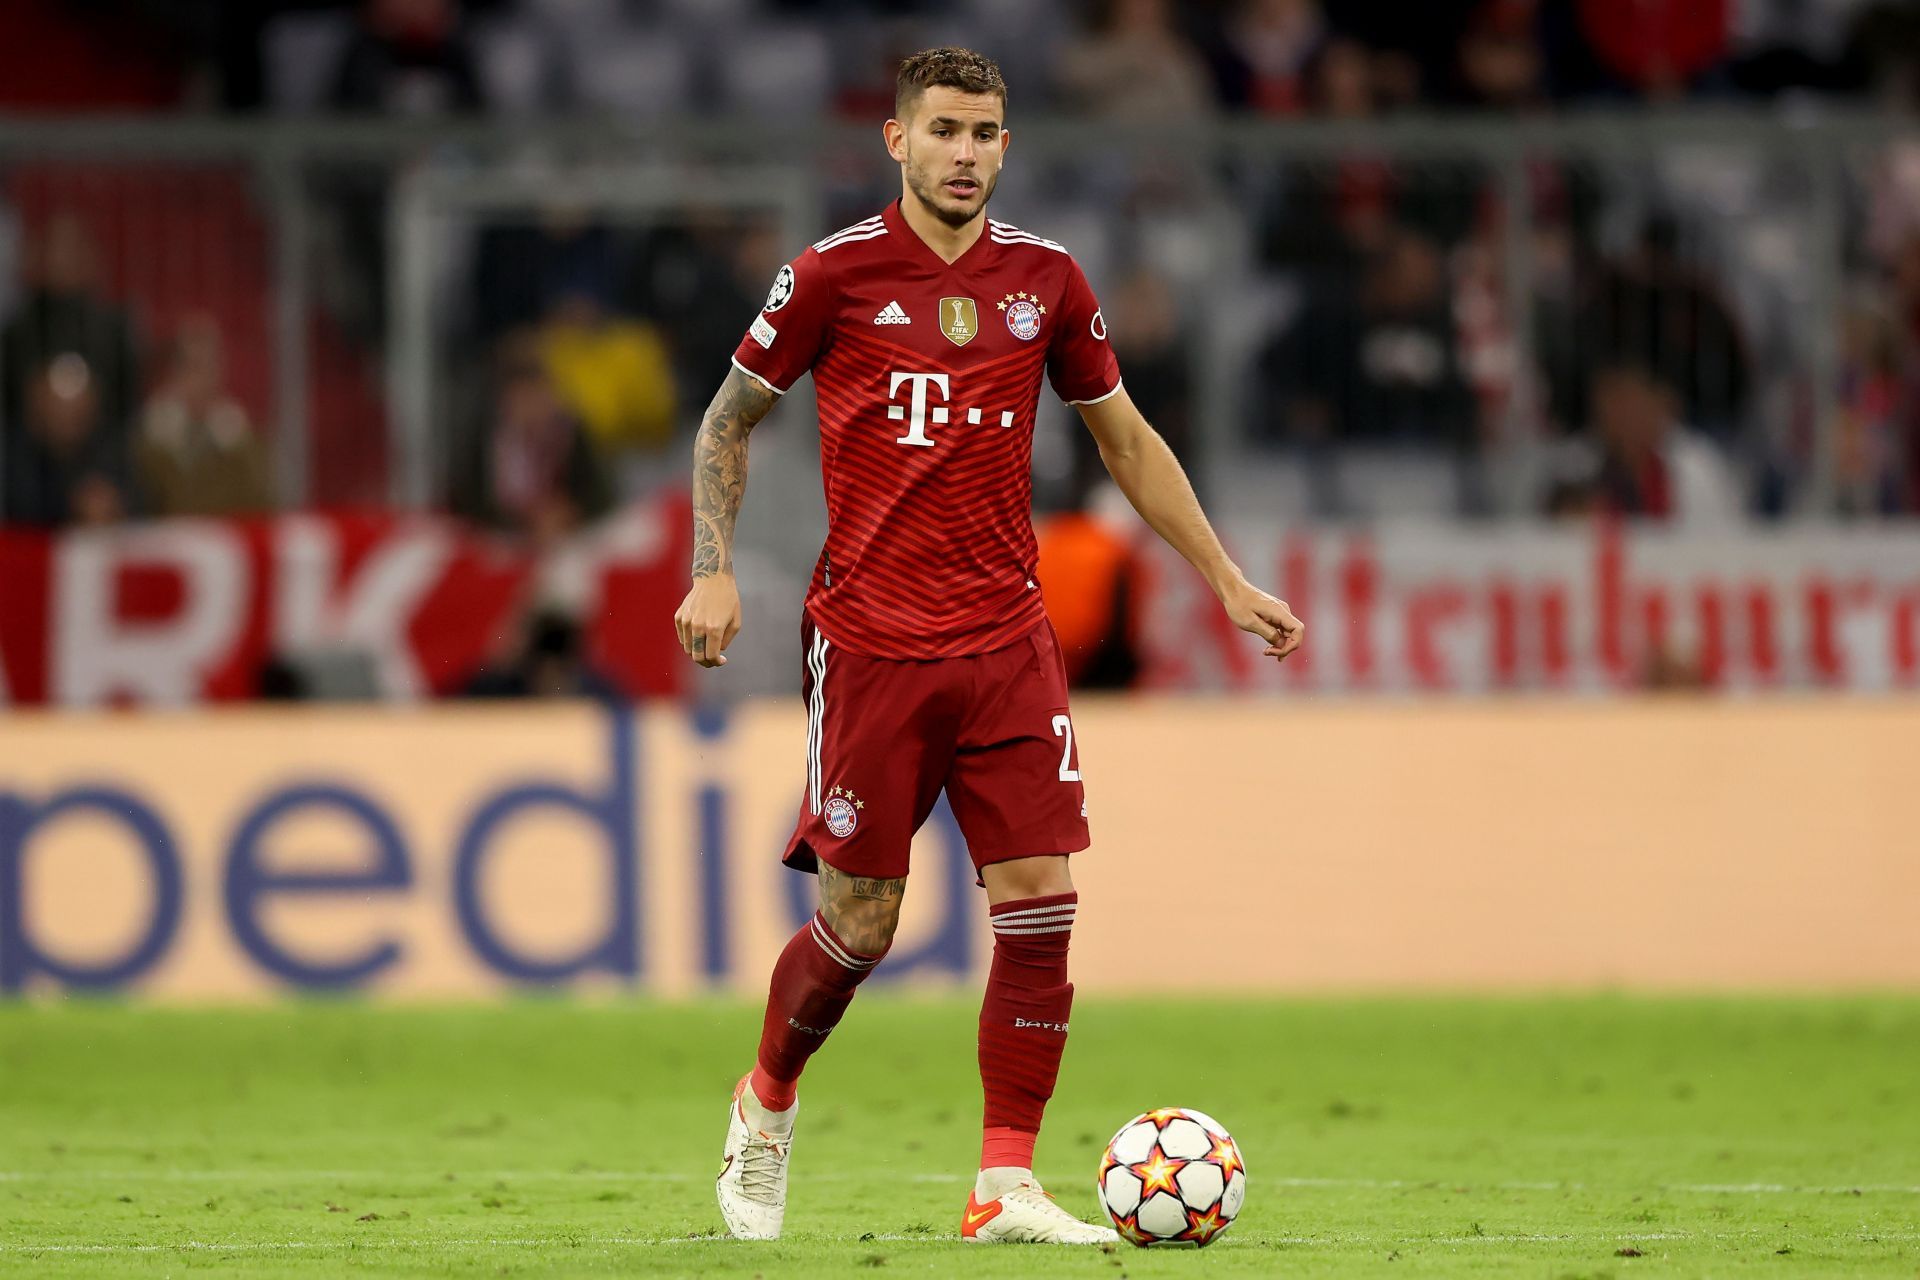 Lucas Hernandez is a reliable player at the heart of defence for club and country.